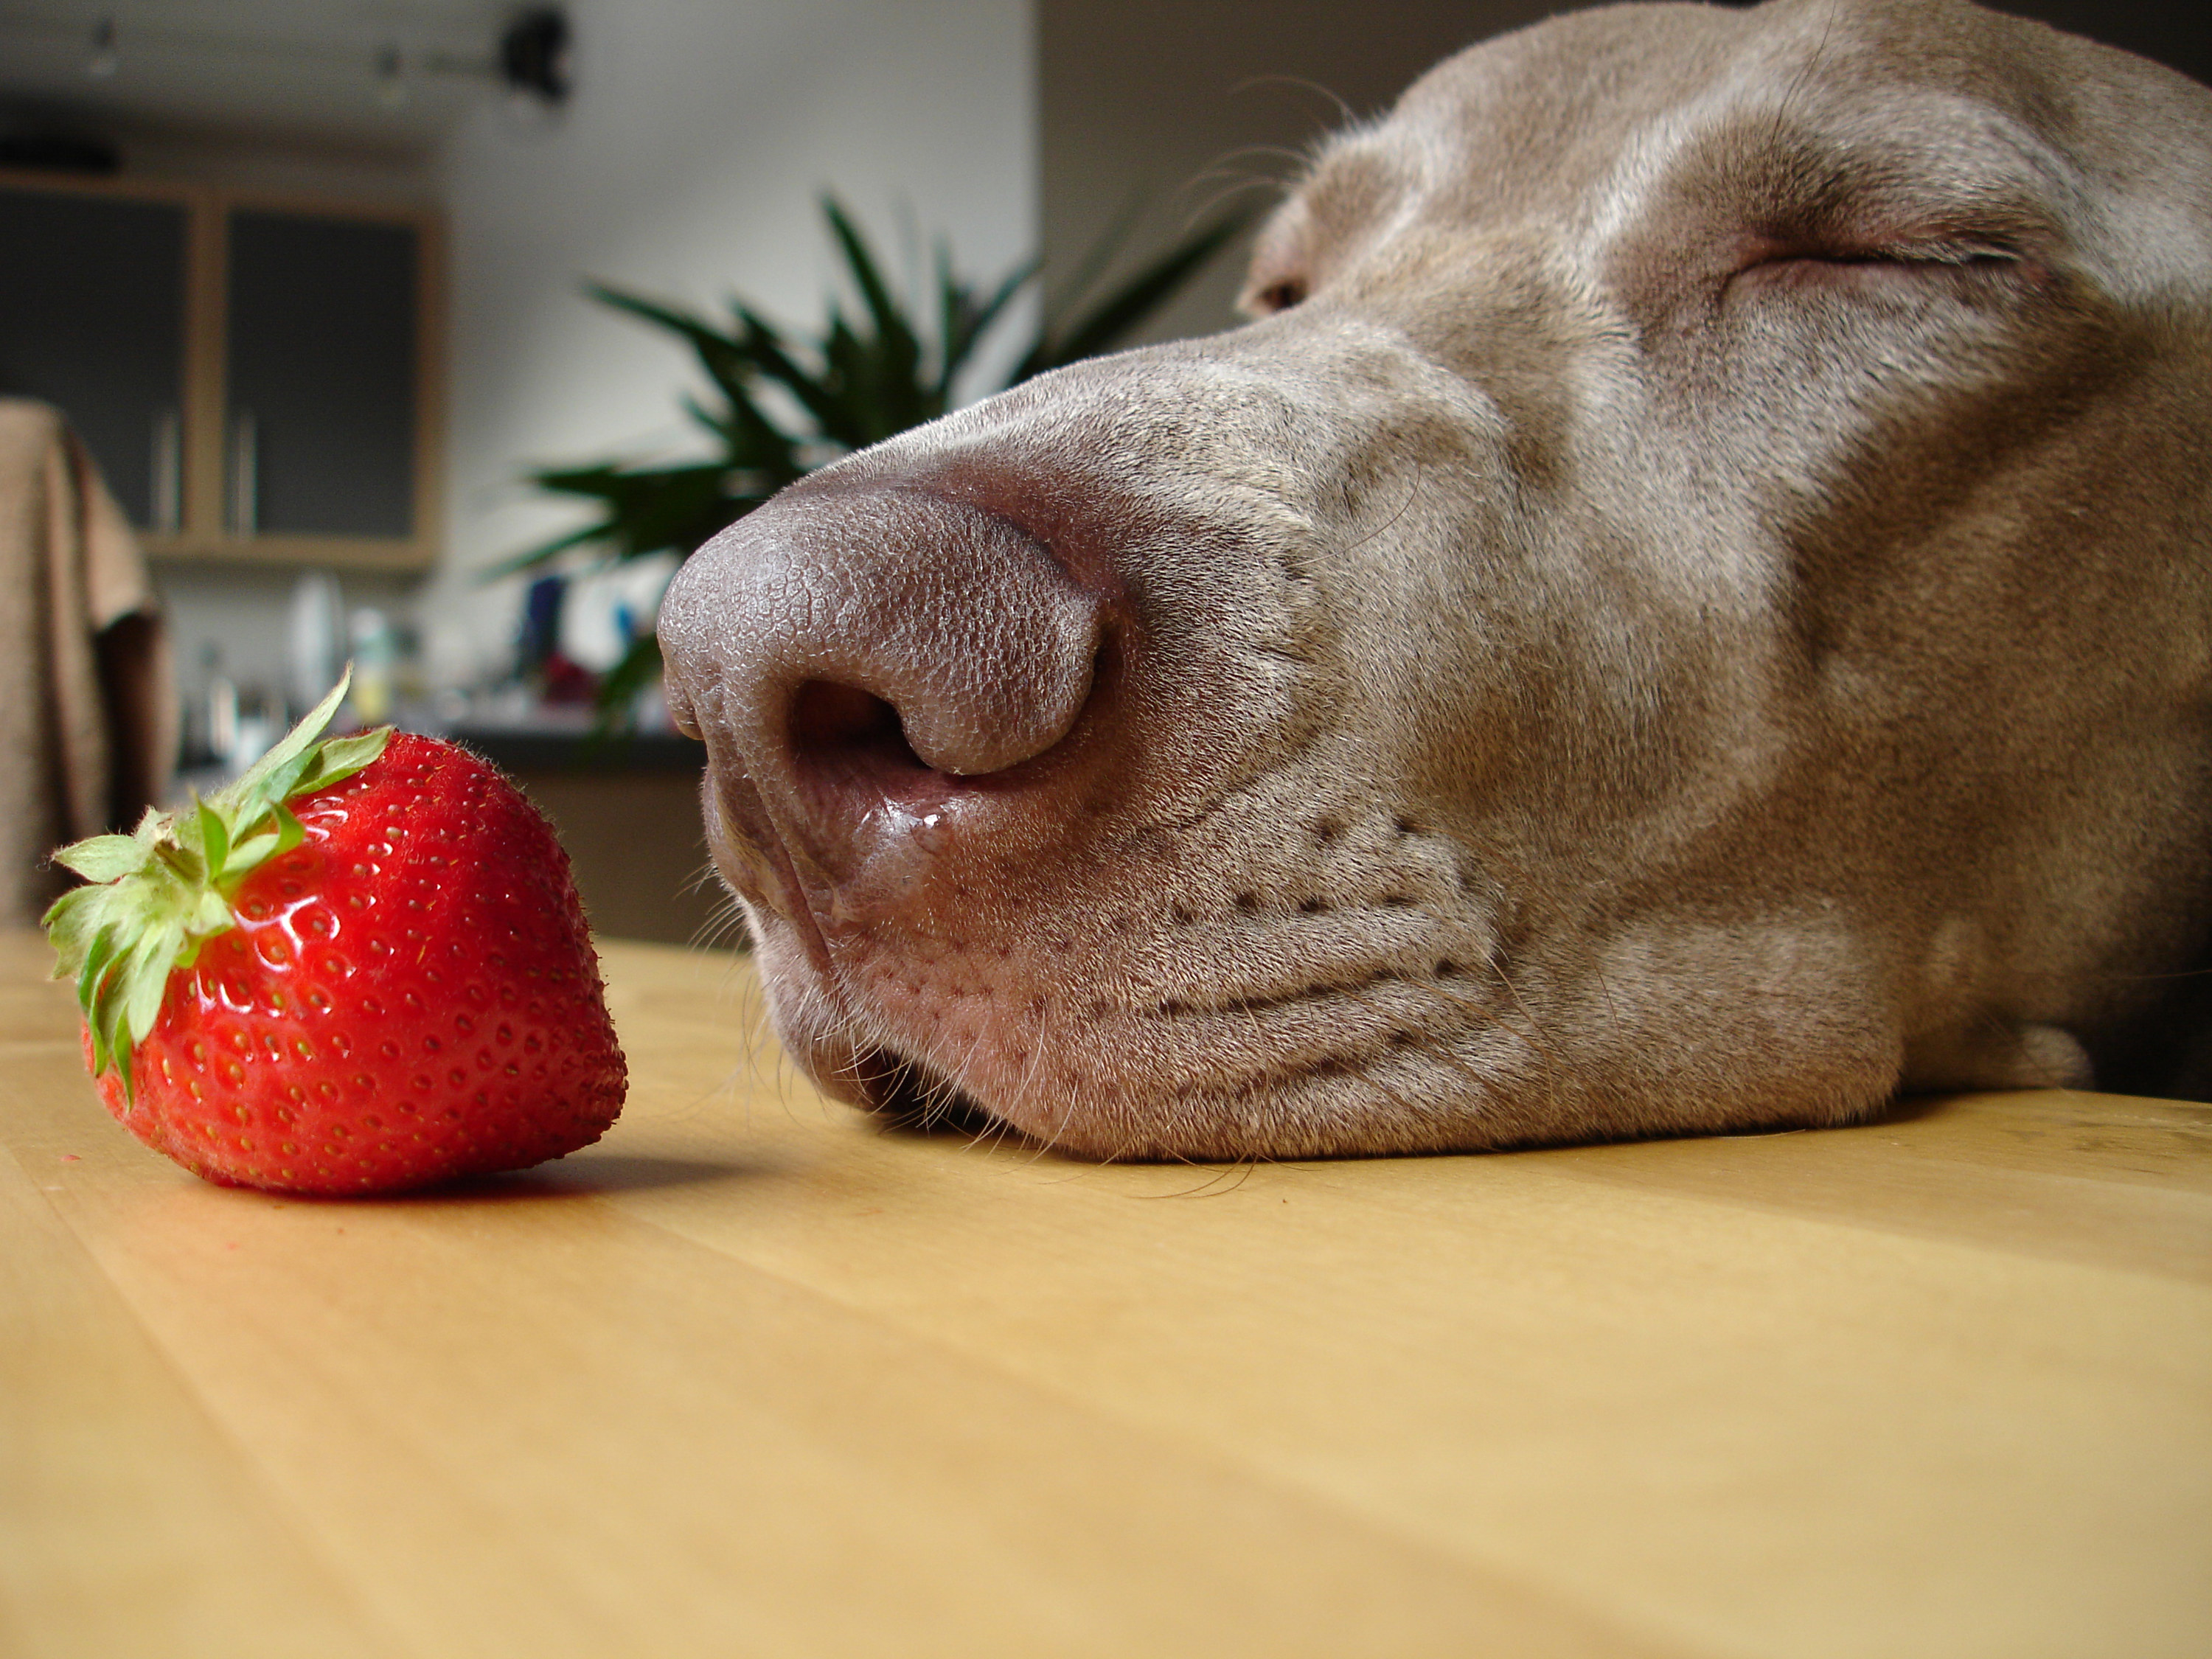 dog sniffing strawberry on dining table